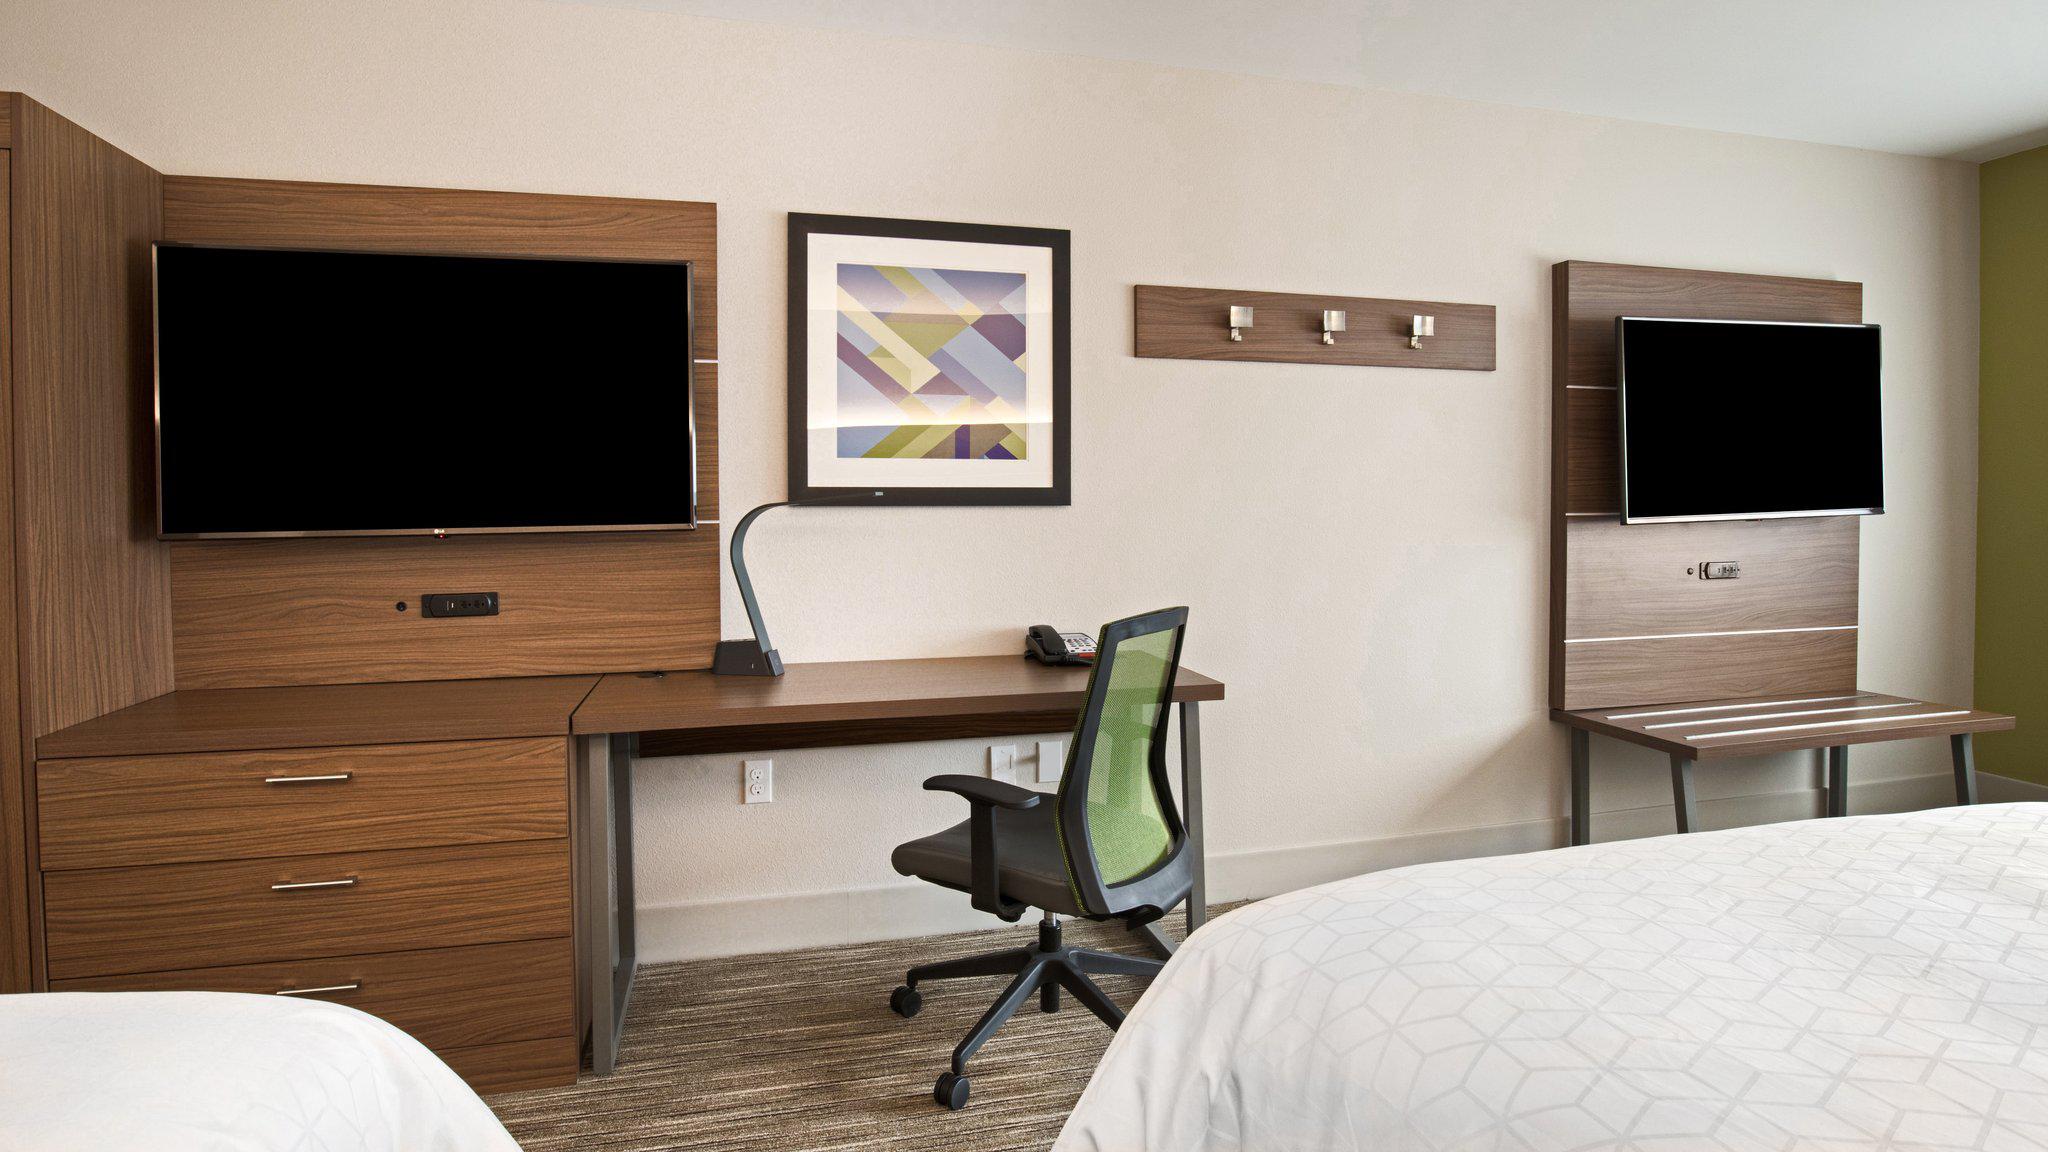 Holiday Inn Express & Suites Racine Photo